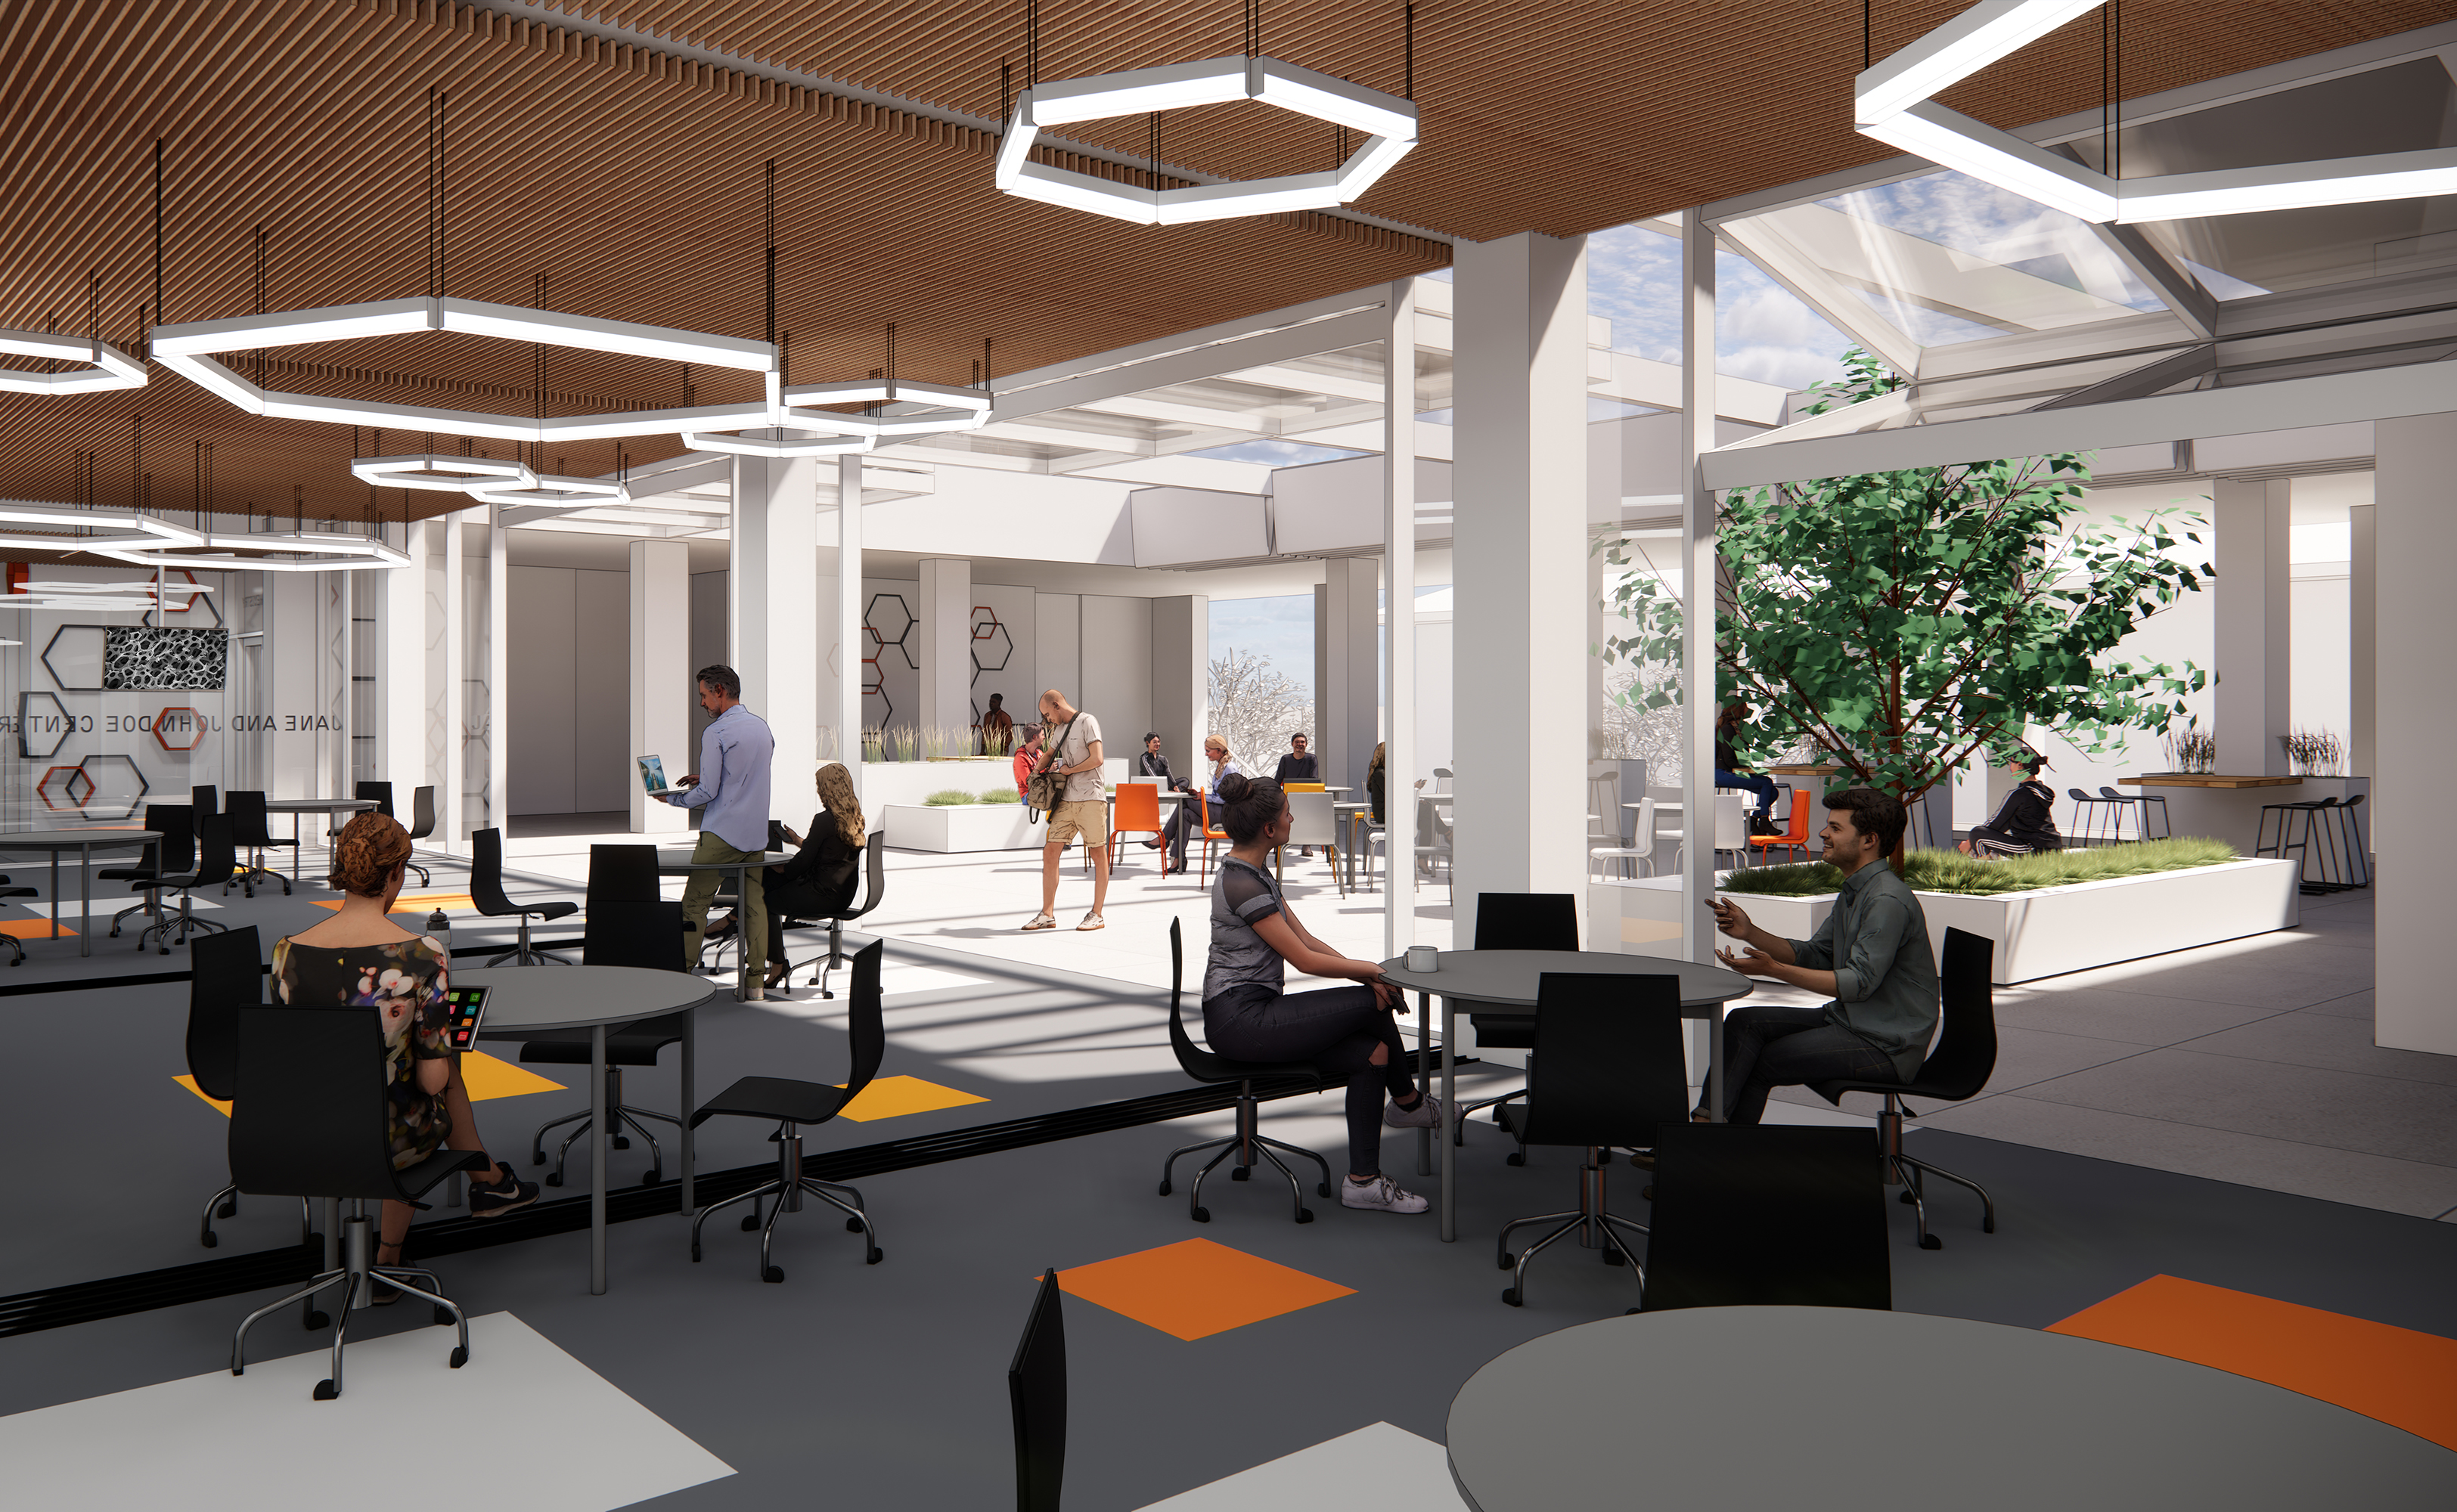 Architect's rendering of the Norris Hall of Chemistry interior